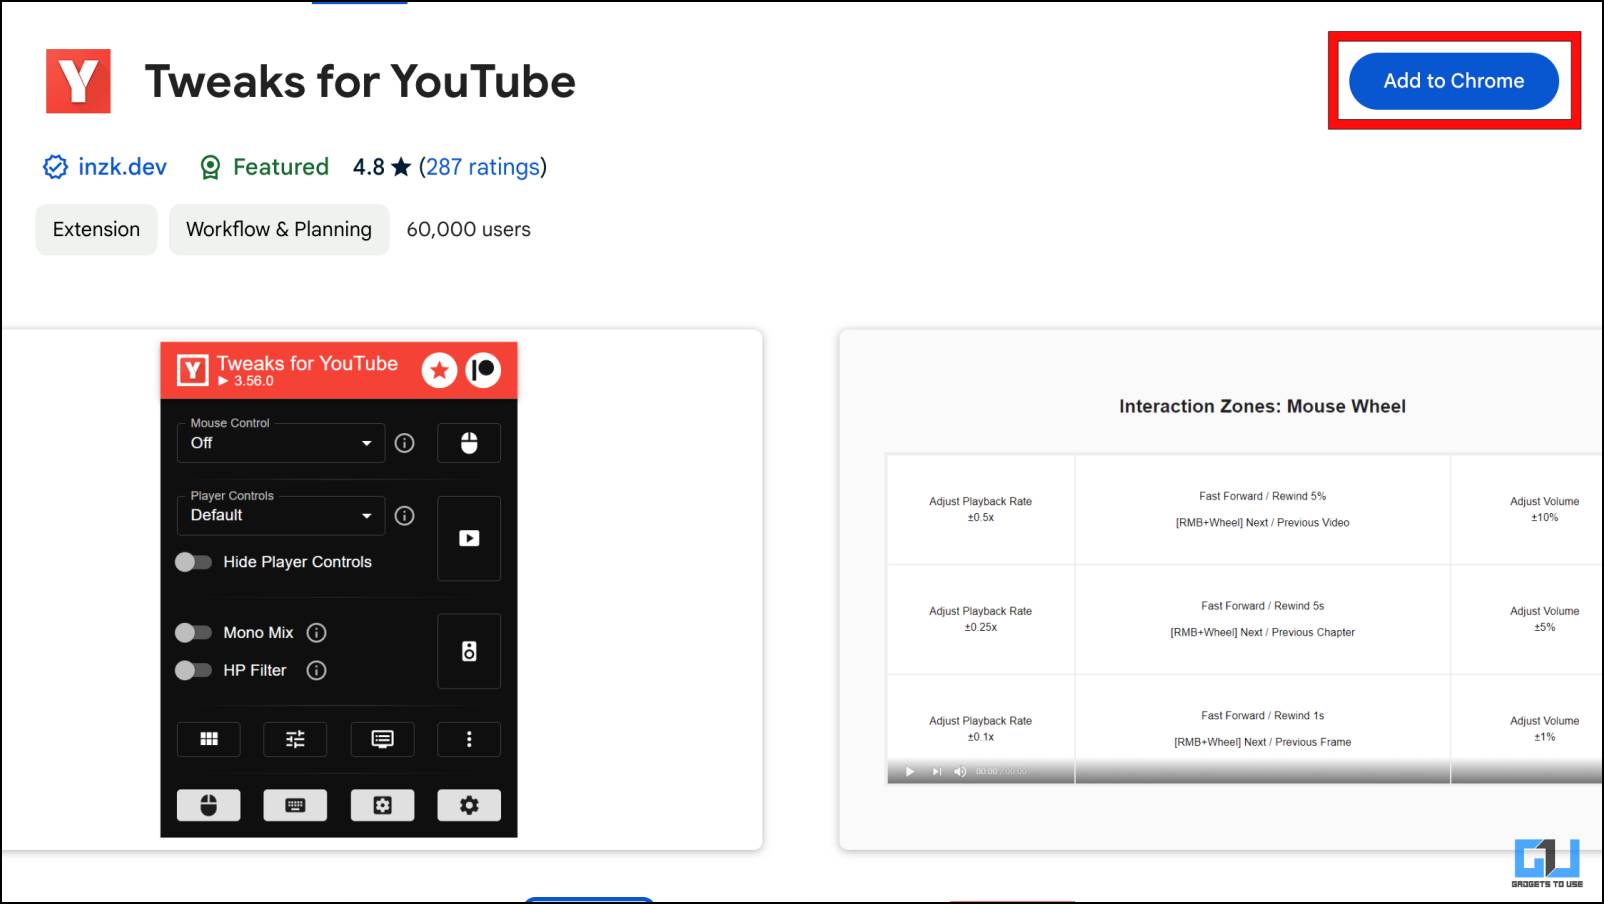 Install Tweaks for YouTube Extension in Chrome